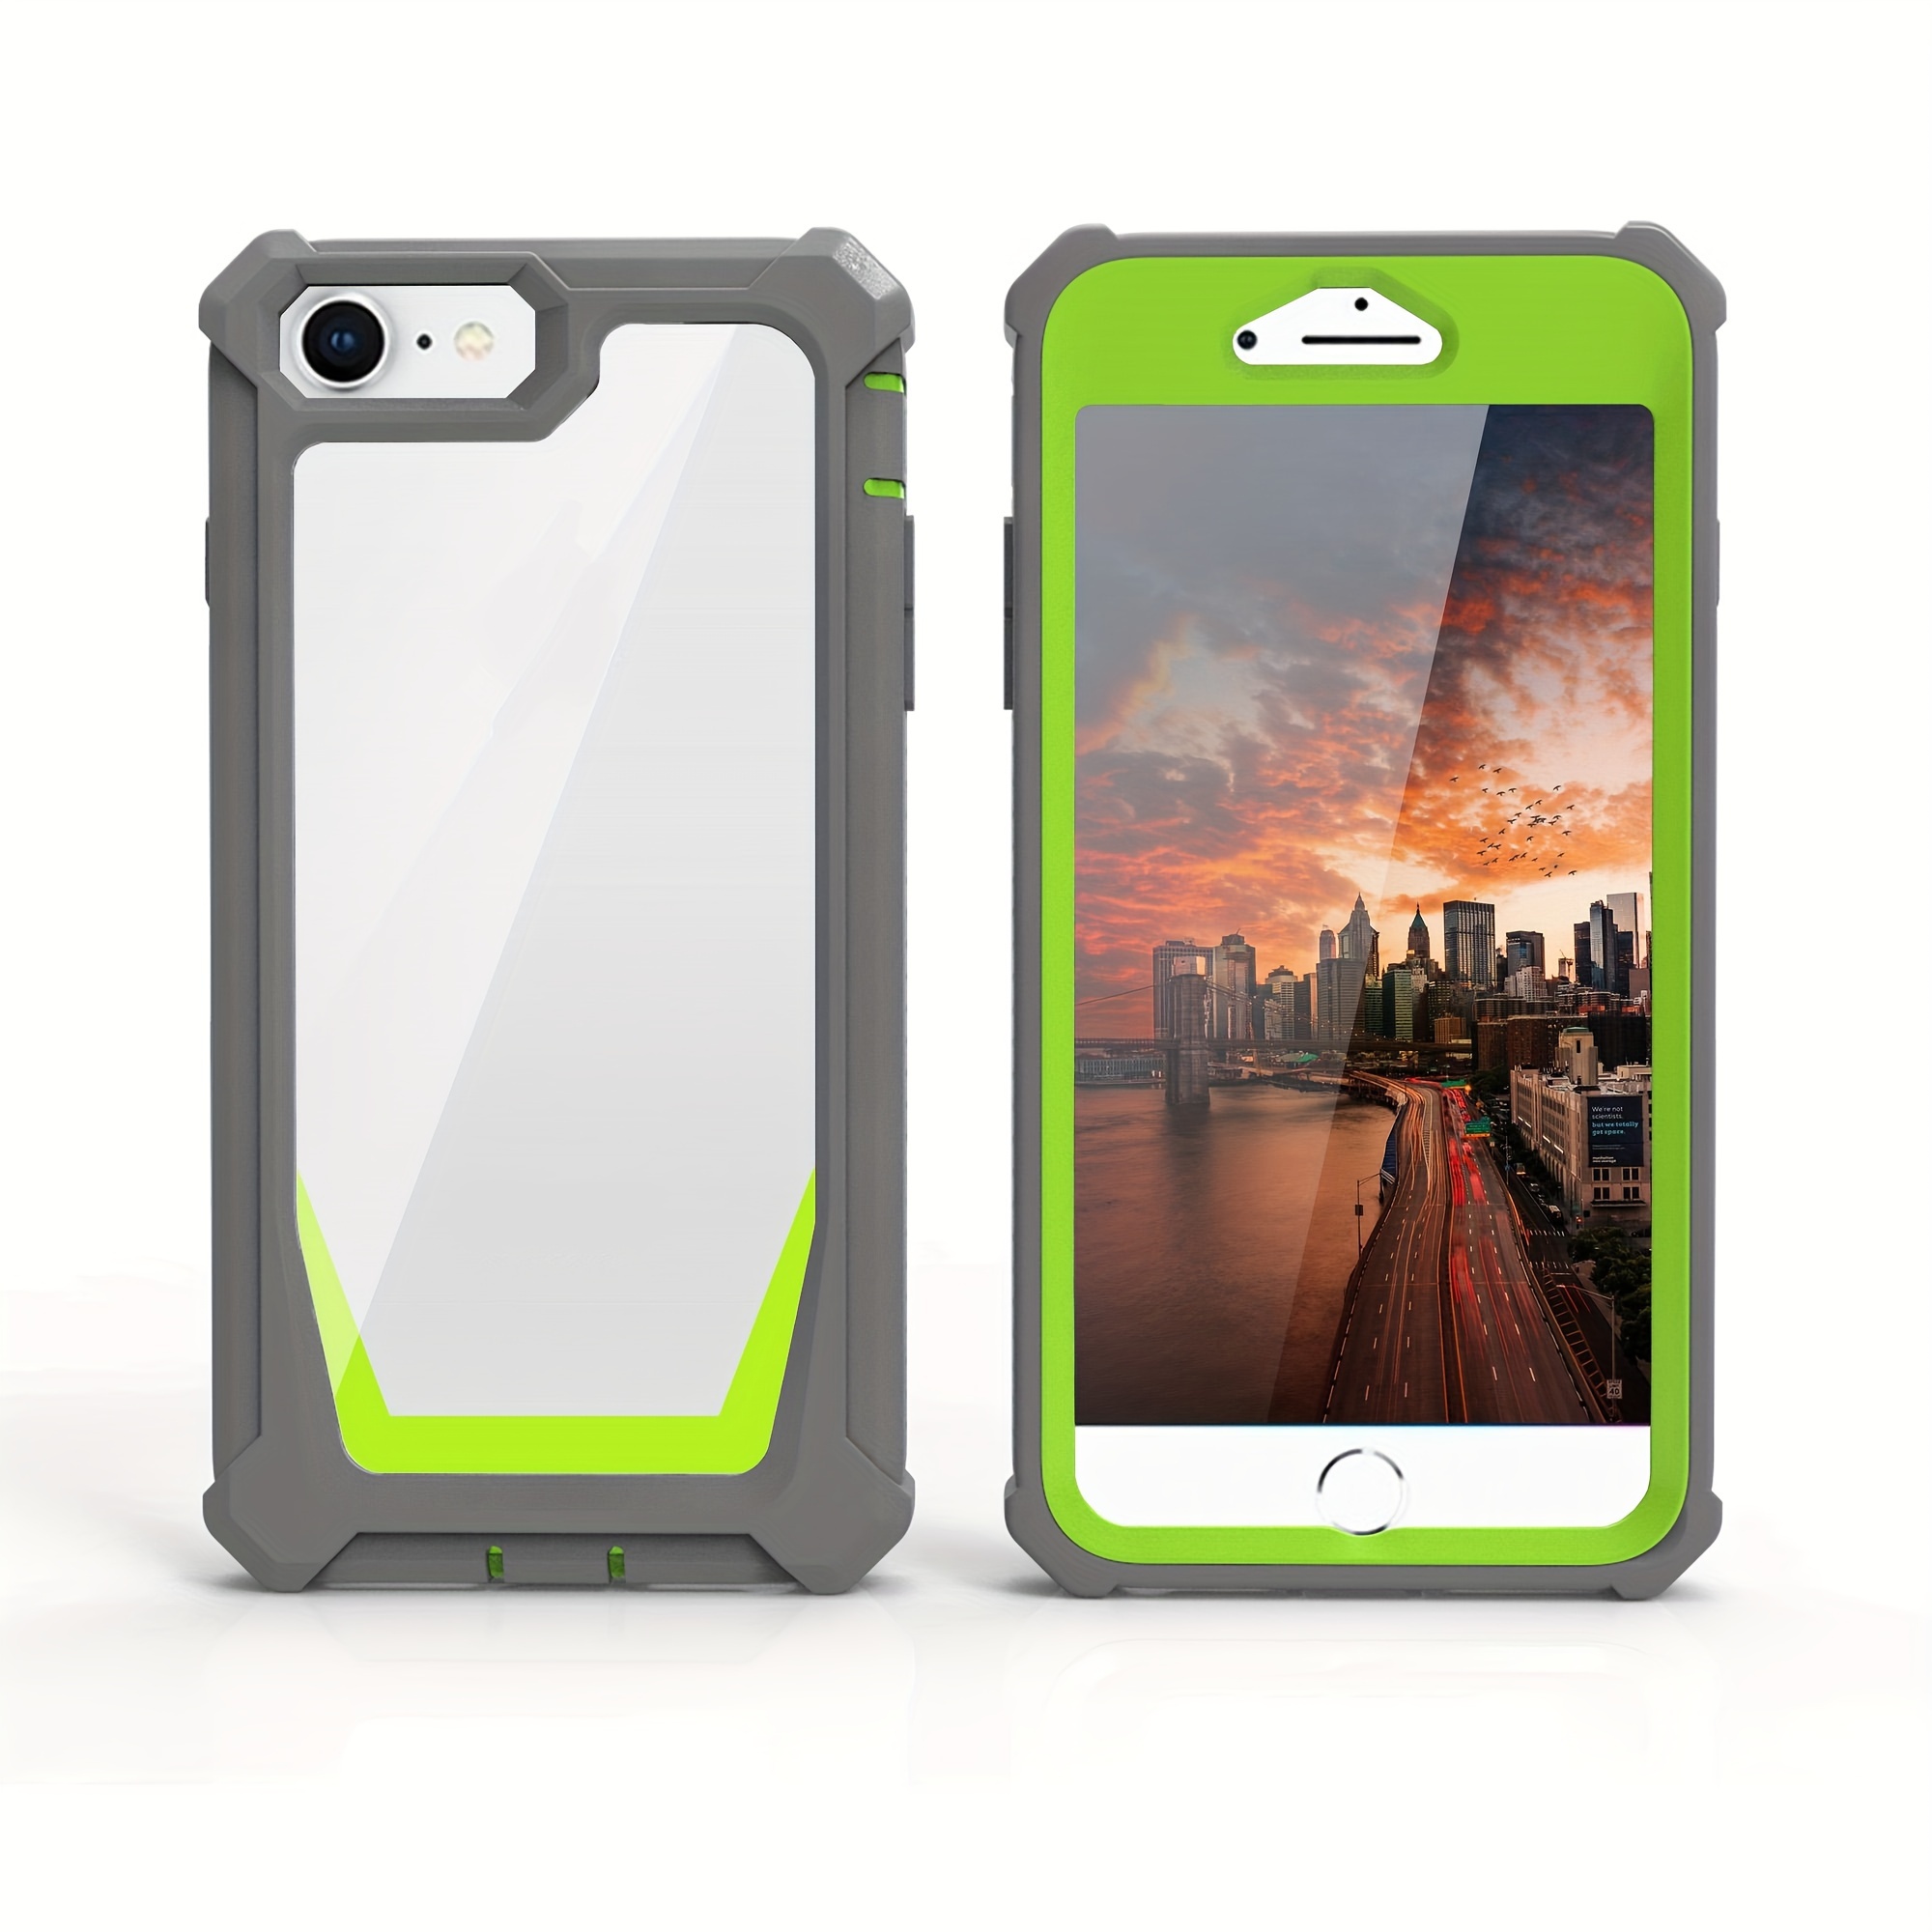 Moody Caseswater-resistant Tpu Silicone Iphone Case - Anti-scratch,  Non-slip, Dustproof